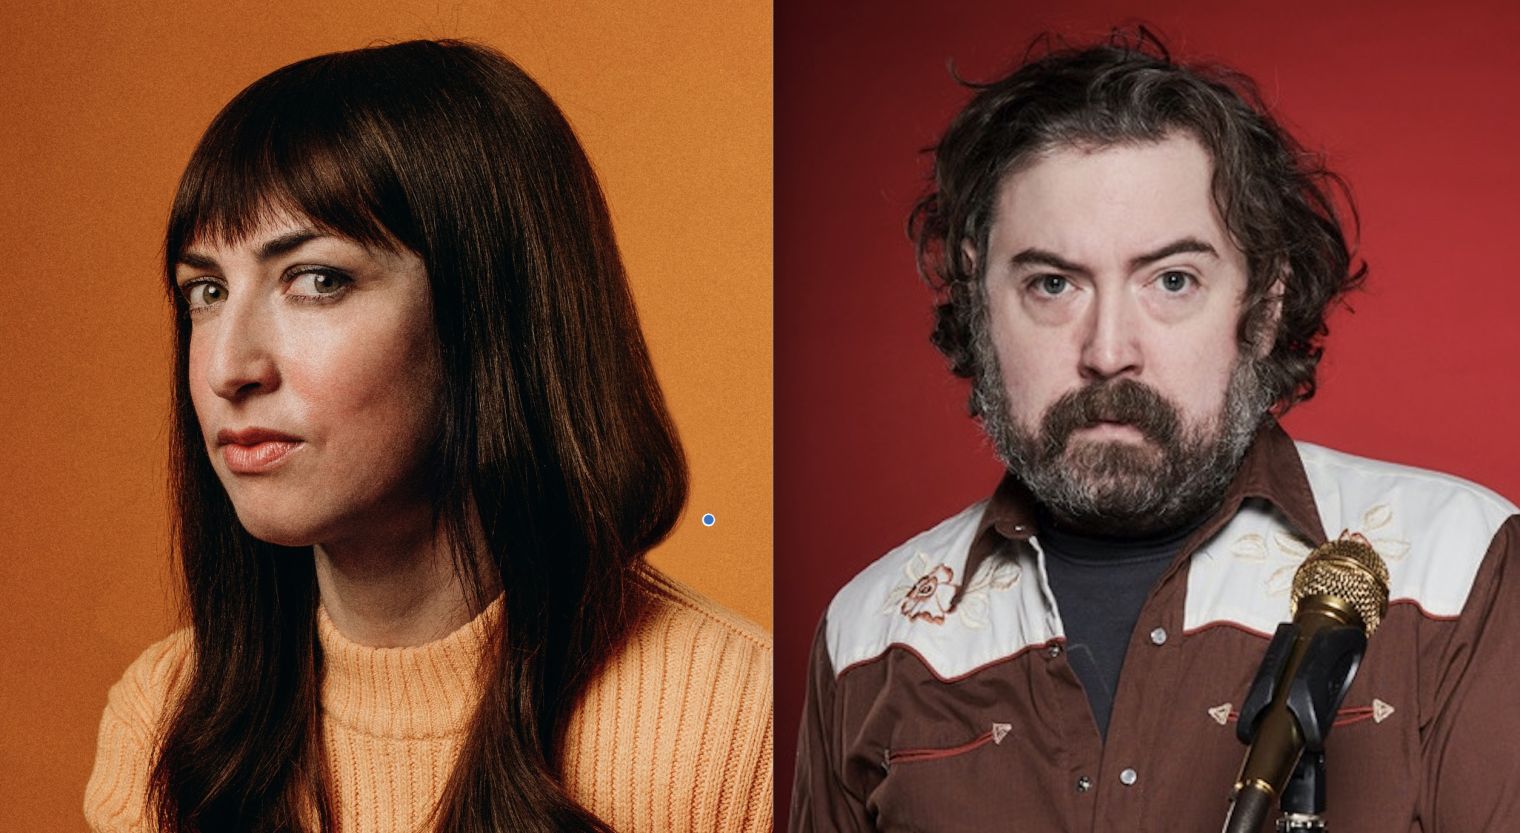 Nick Helm and Liz Guterbock will both appear at the Sound + Vision Cambridge Fringe Festival this weekend